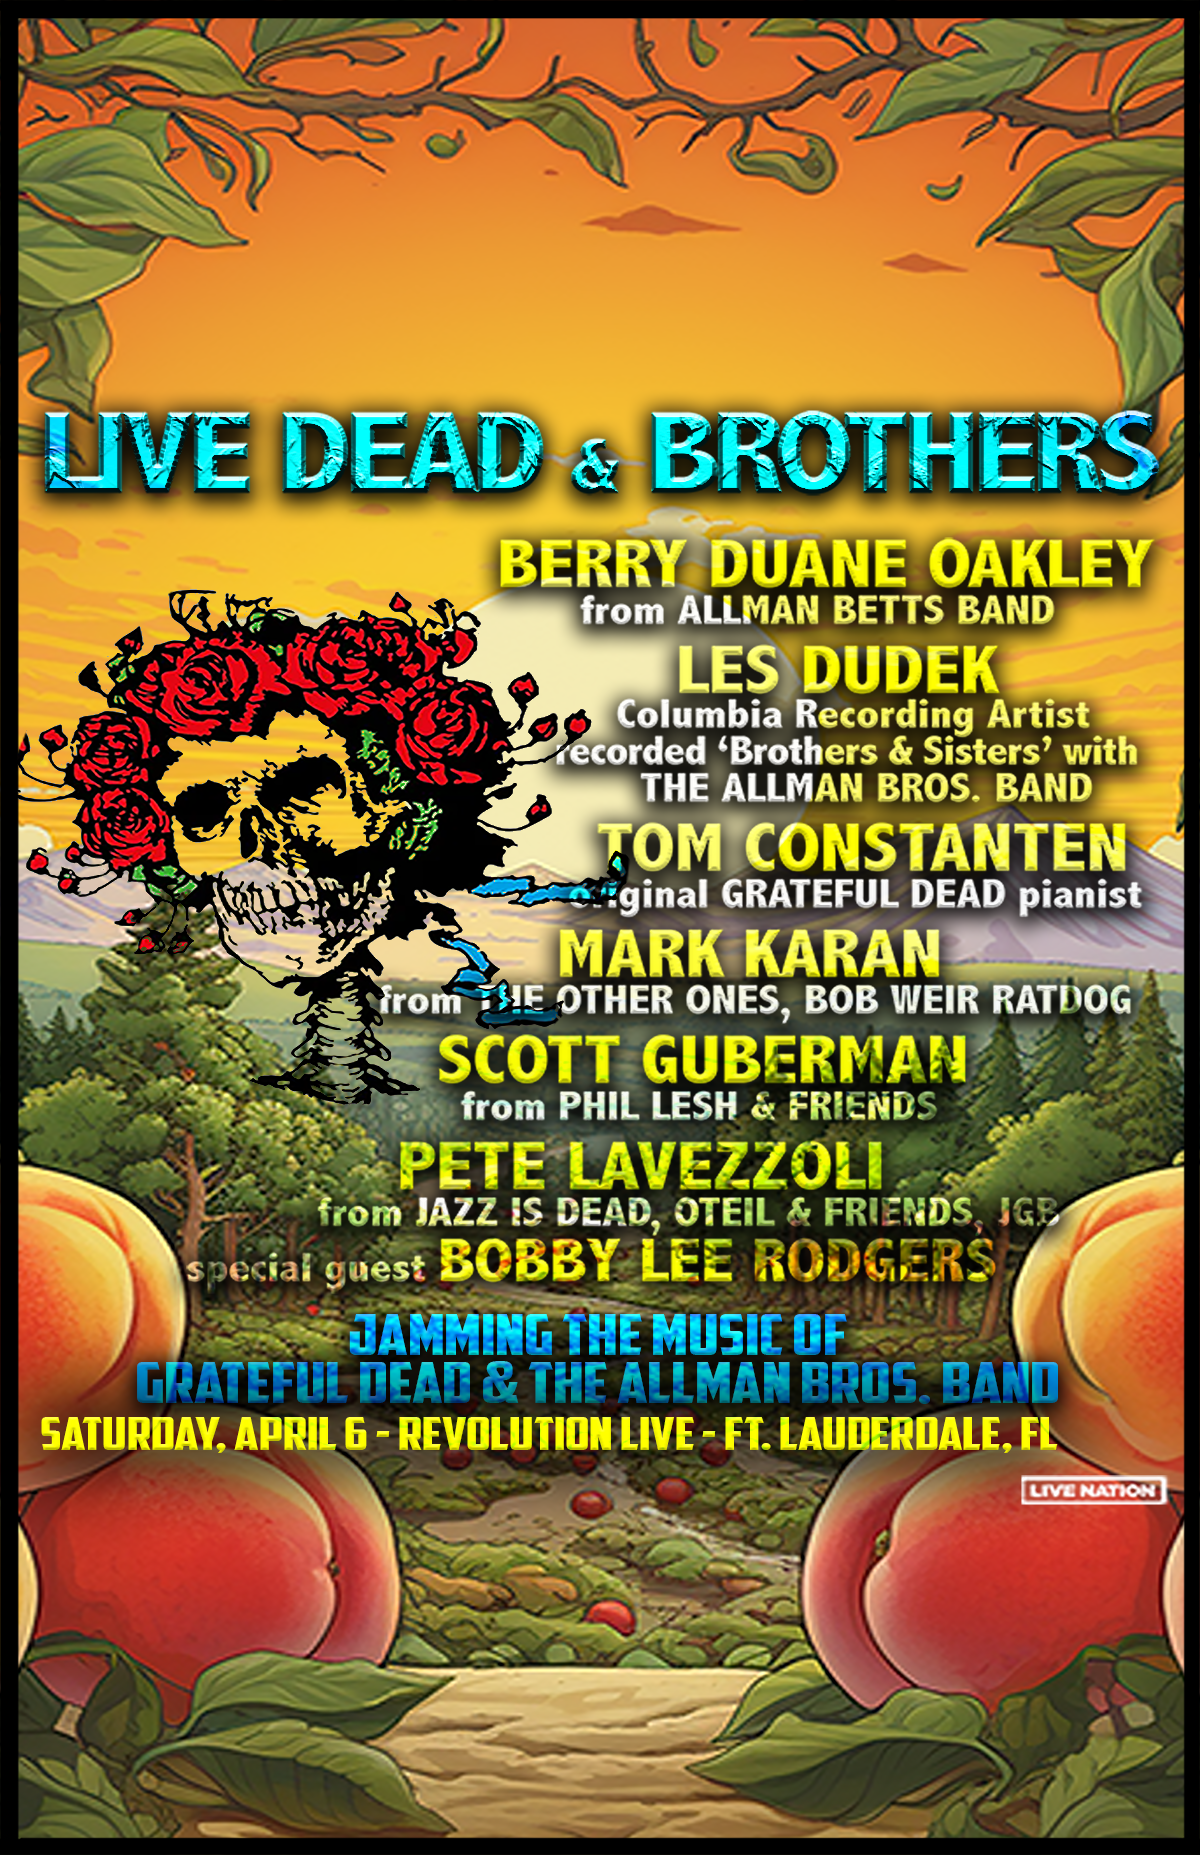 Live Dead & Brothers: An All - Star Celebration of Grateful Dead & Allman Brothers